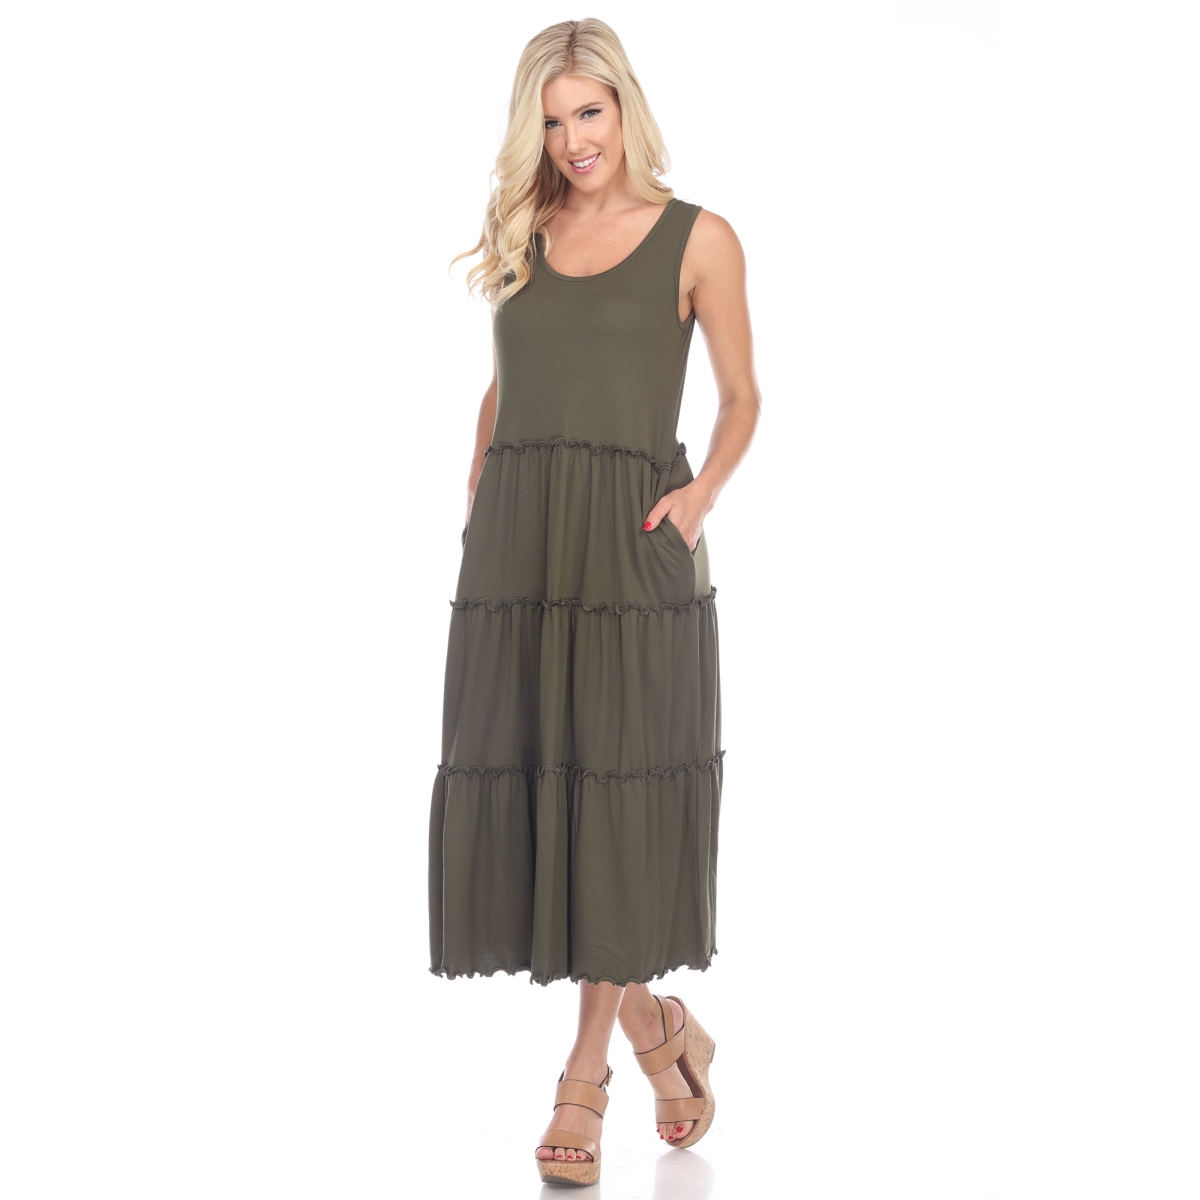 Picture of White Mark 315-02-M Olive Scoop Neck Teired Midi Dress - Medium